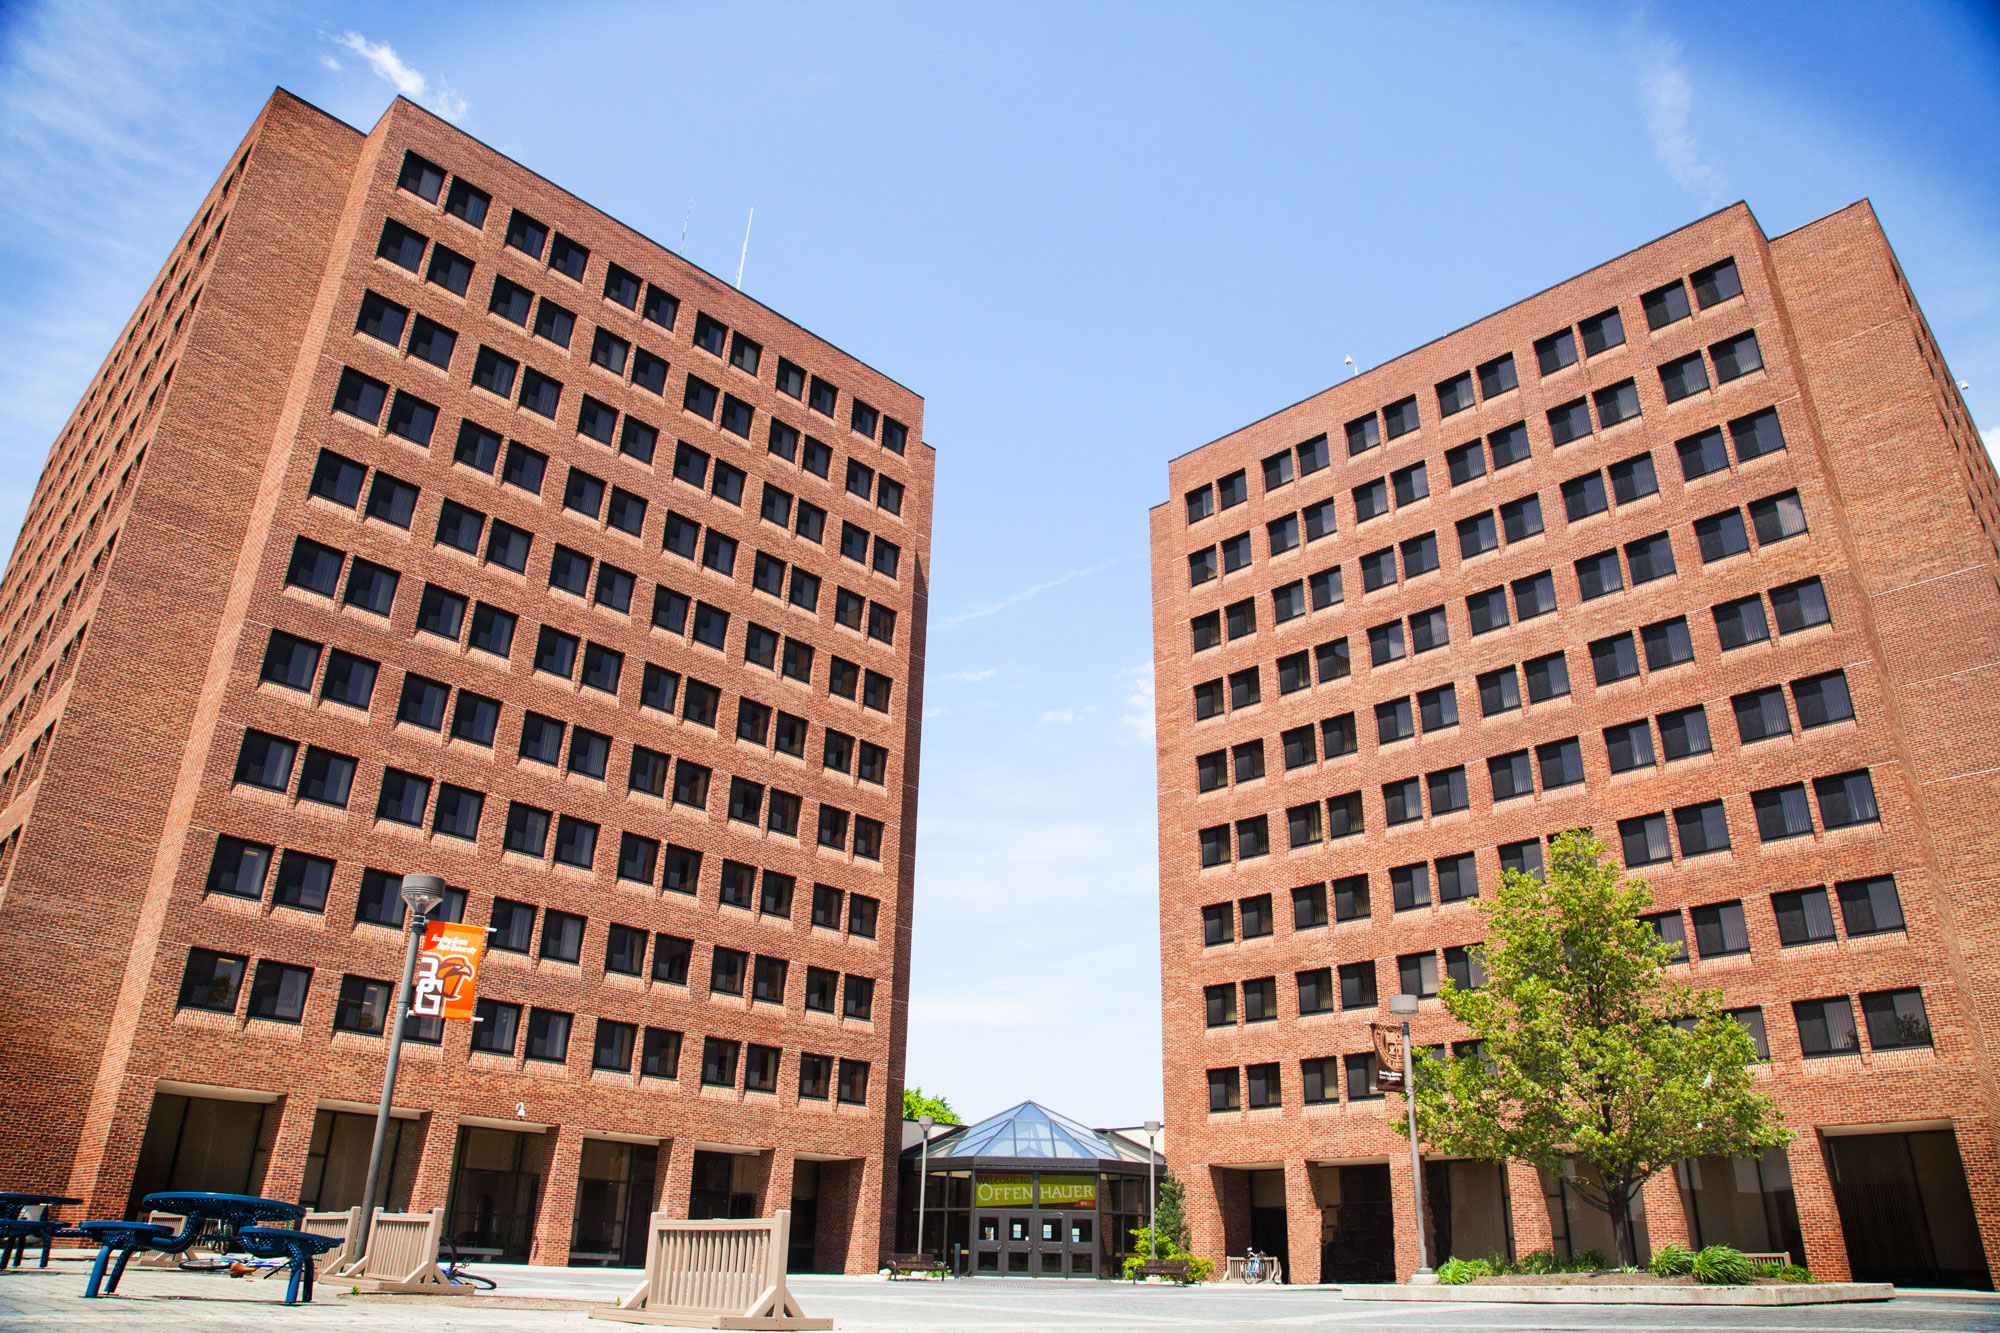 Exterior Image of Offenhauer Towers on a sunny day.